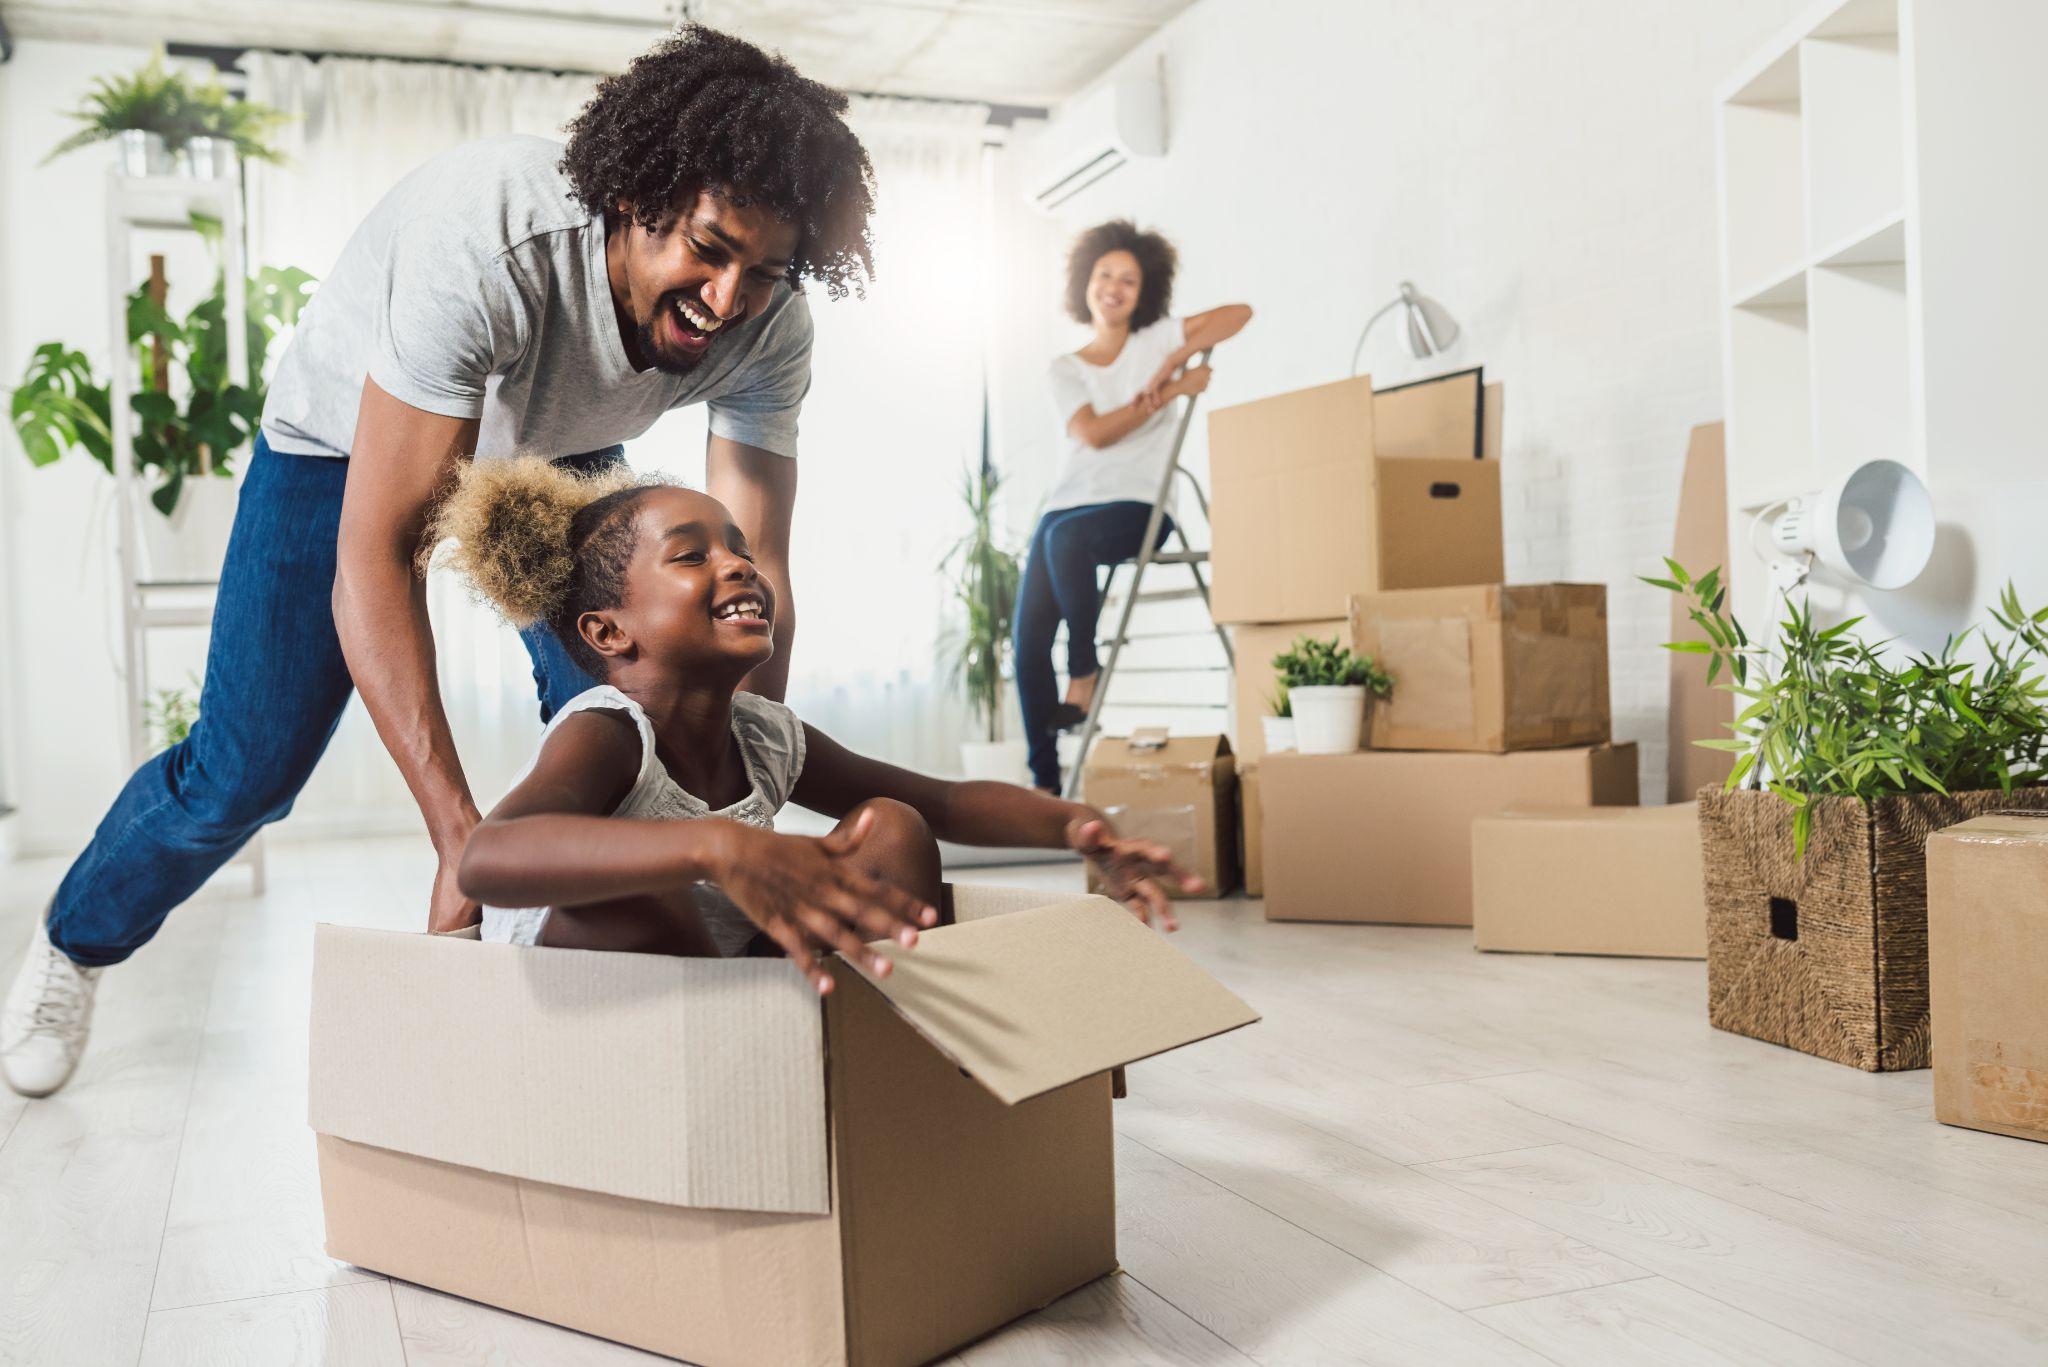 family excitedly unpacking belongings after moving to new house